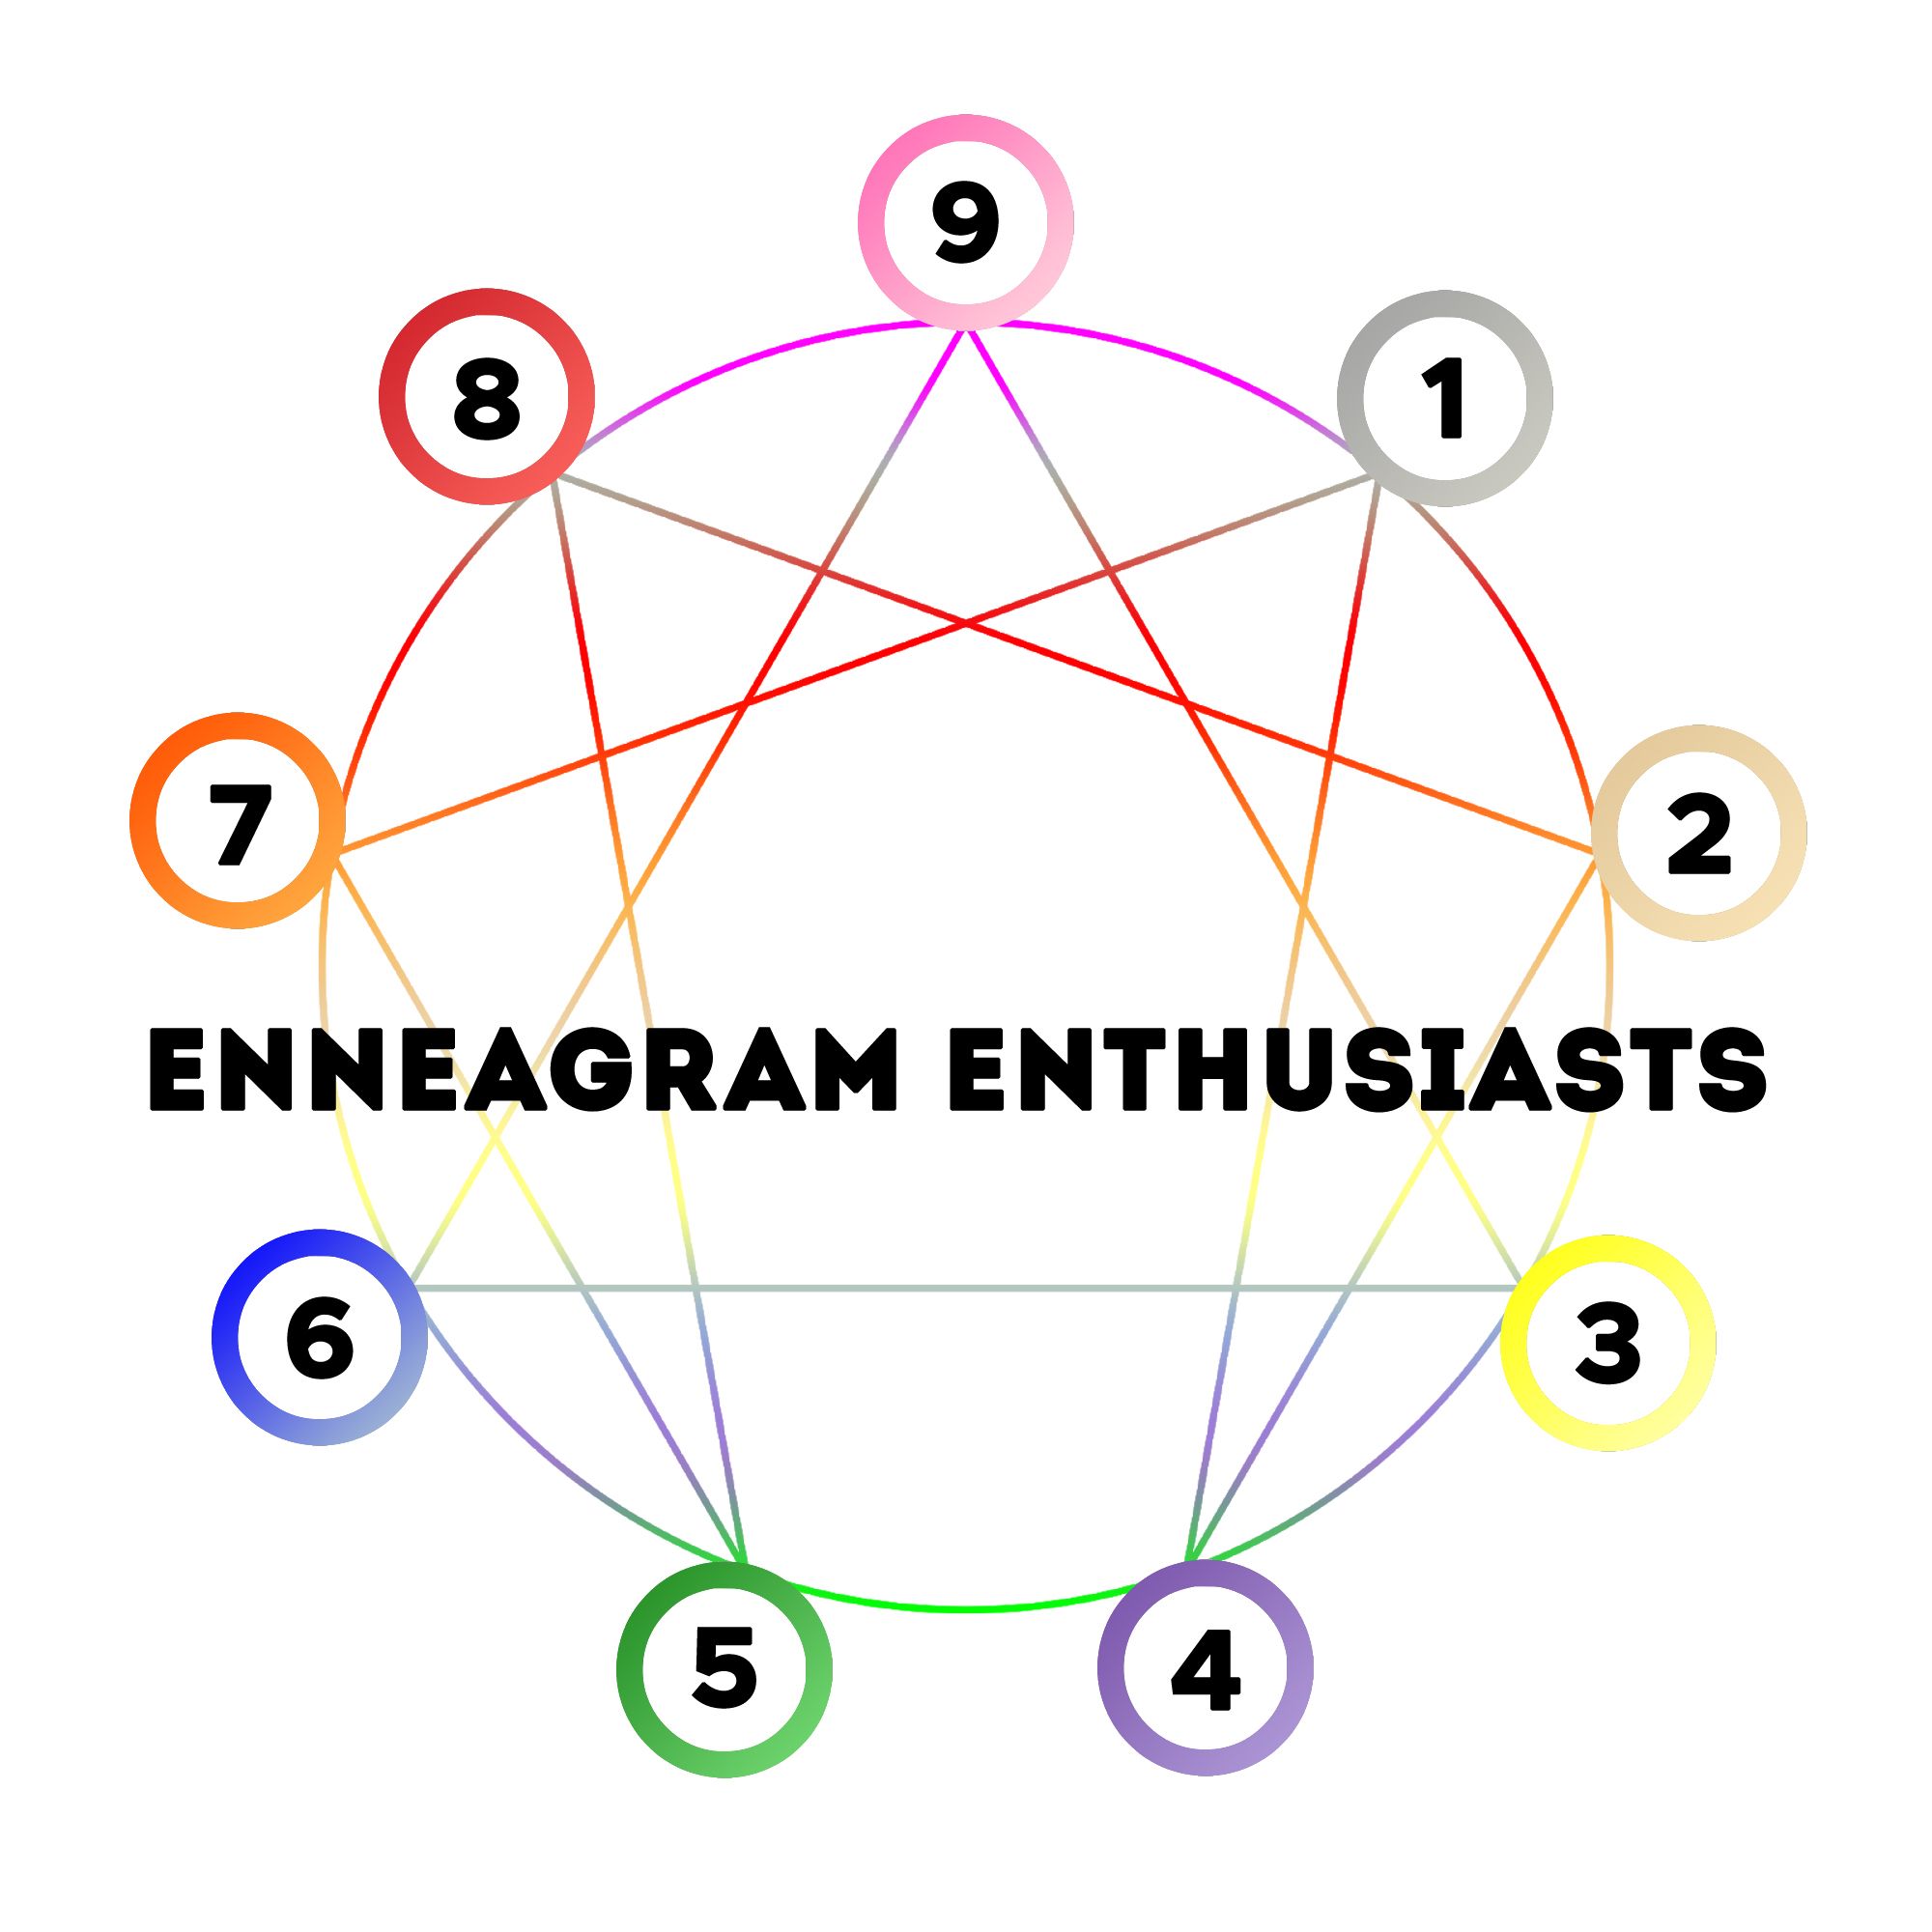 The Enneagram Enthusiasts